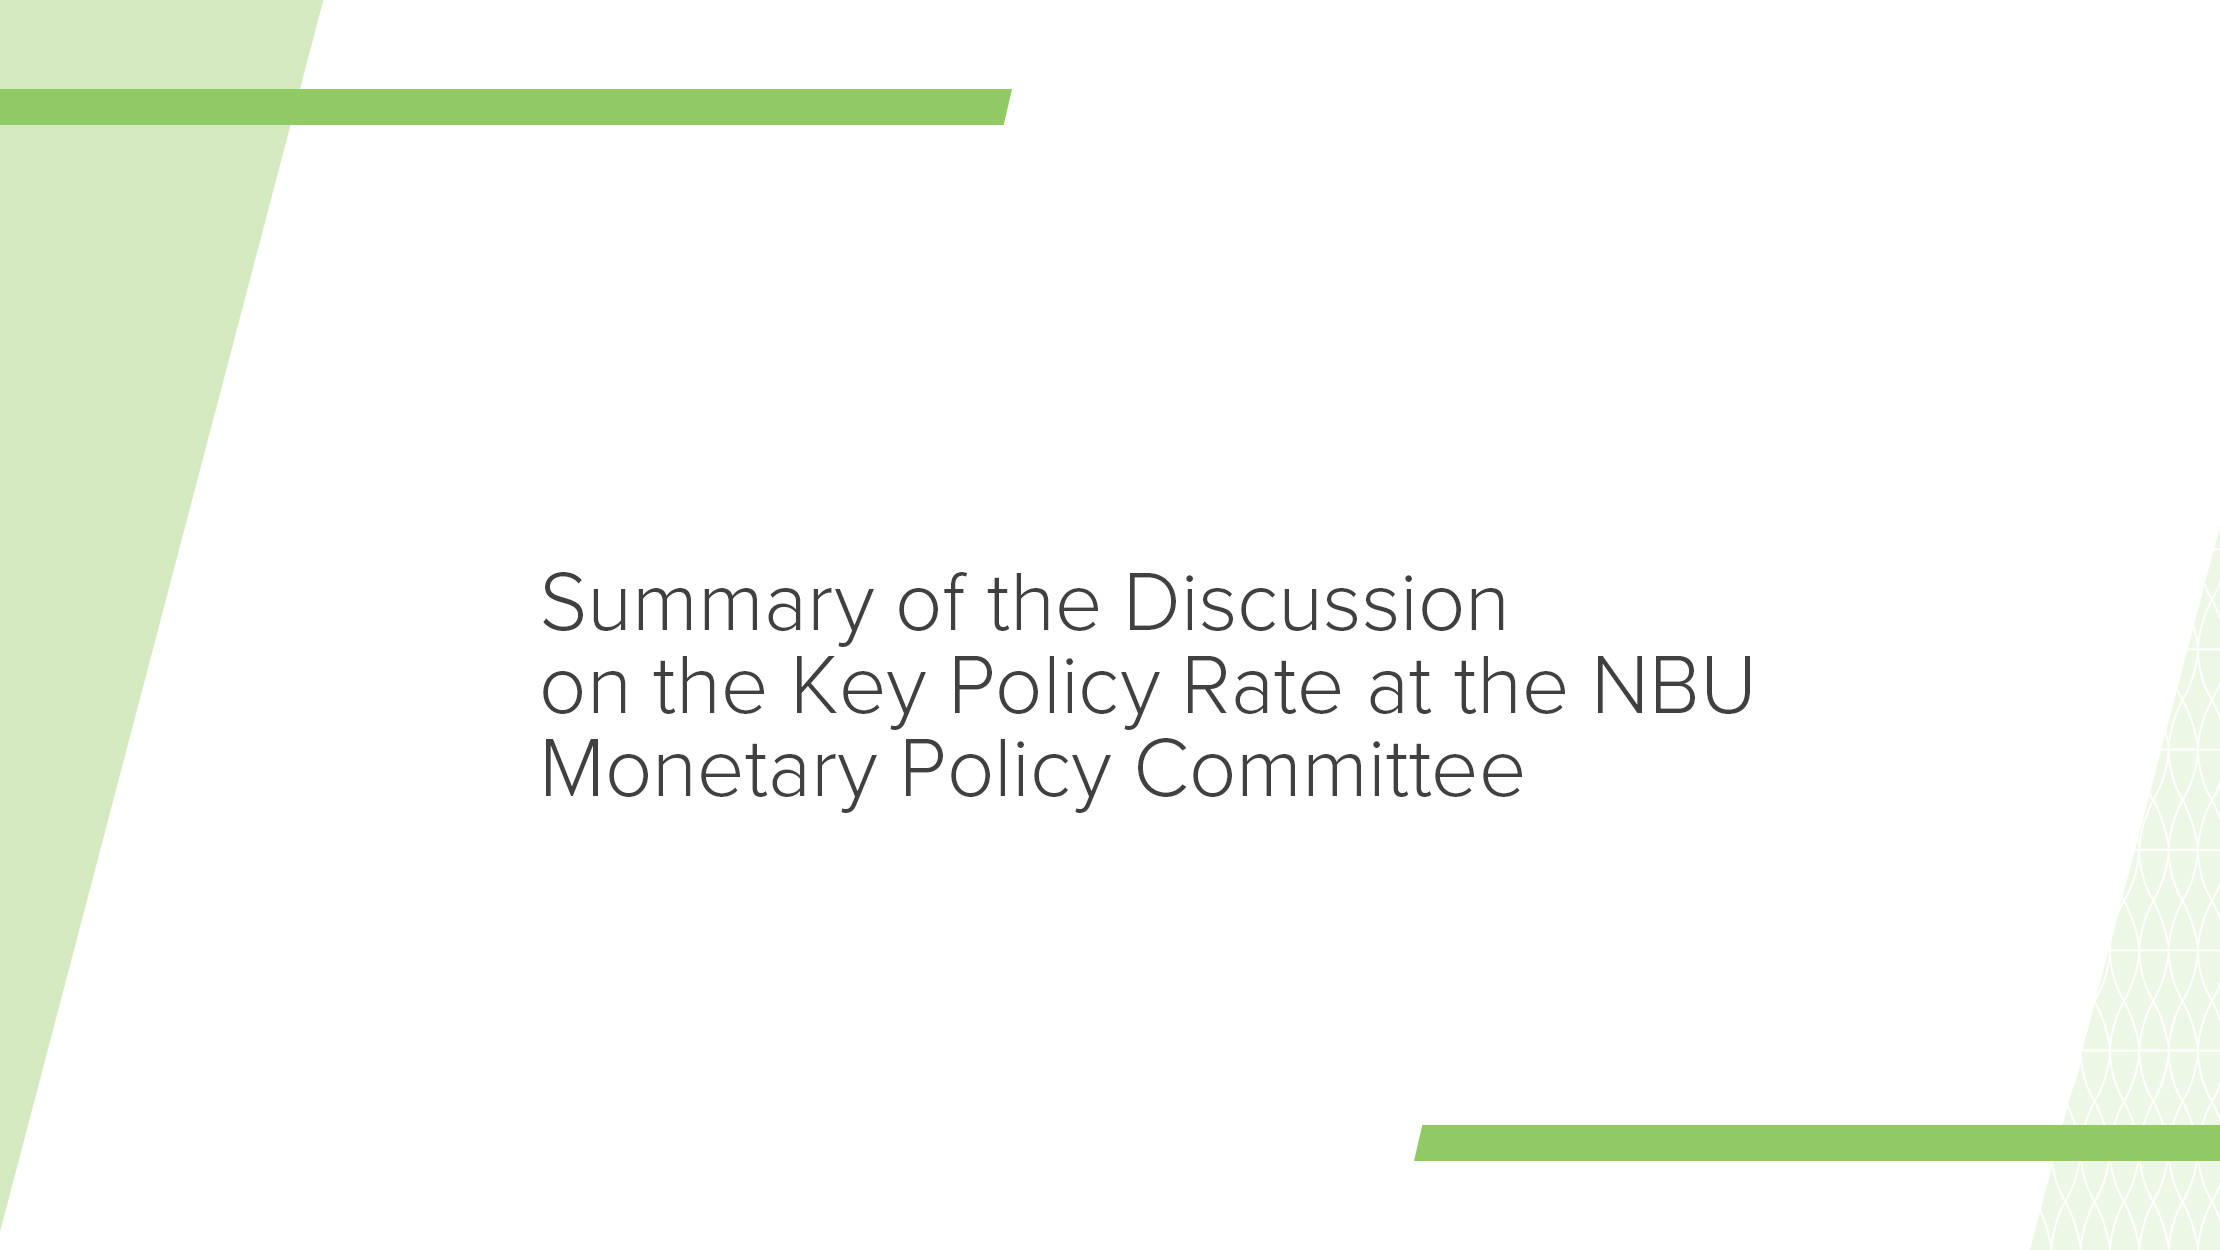 Summary of Key Policy Rate Discussion by NBU Monetary Policy Committee on 20 January 2021